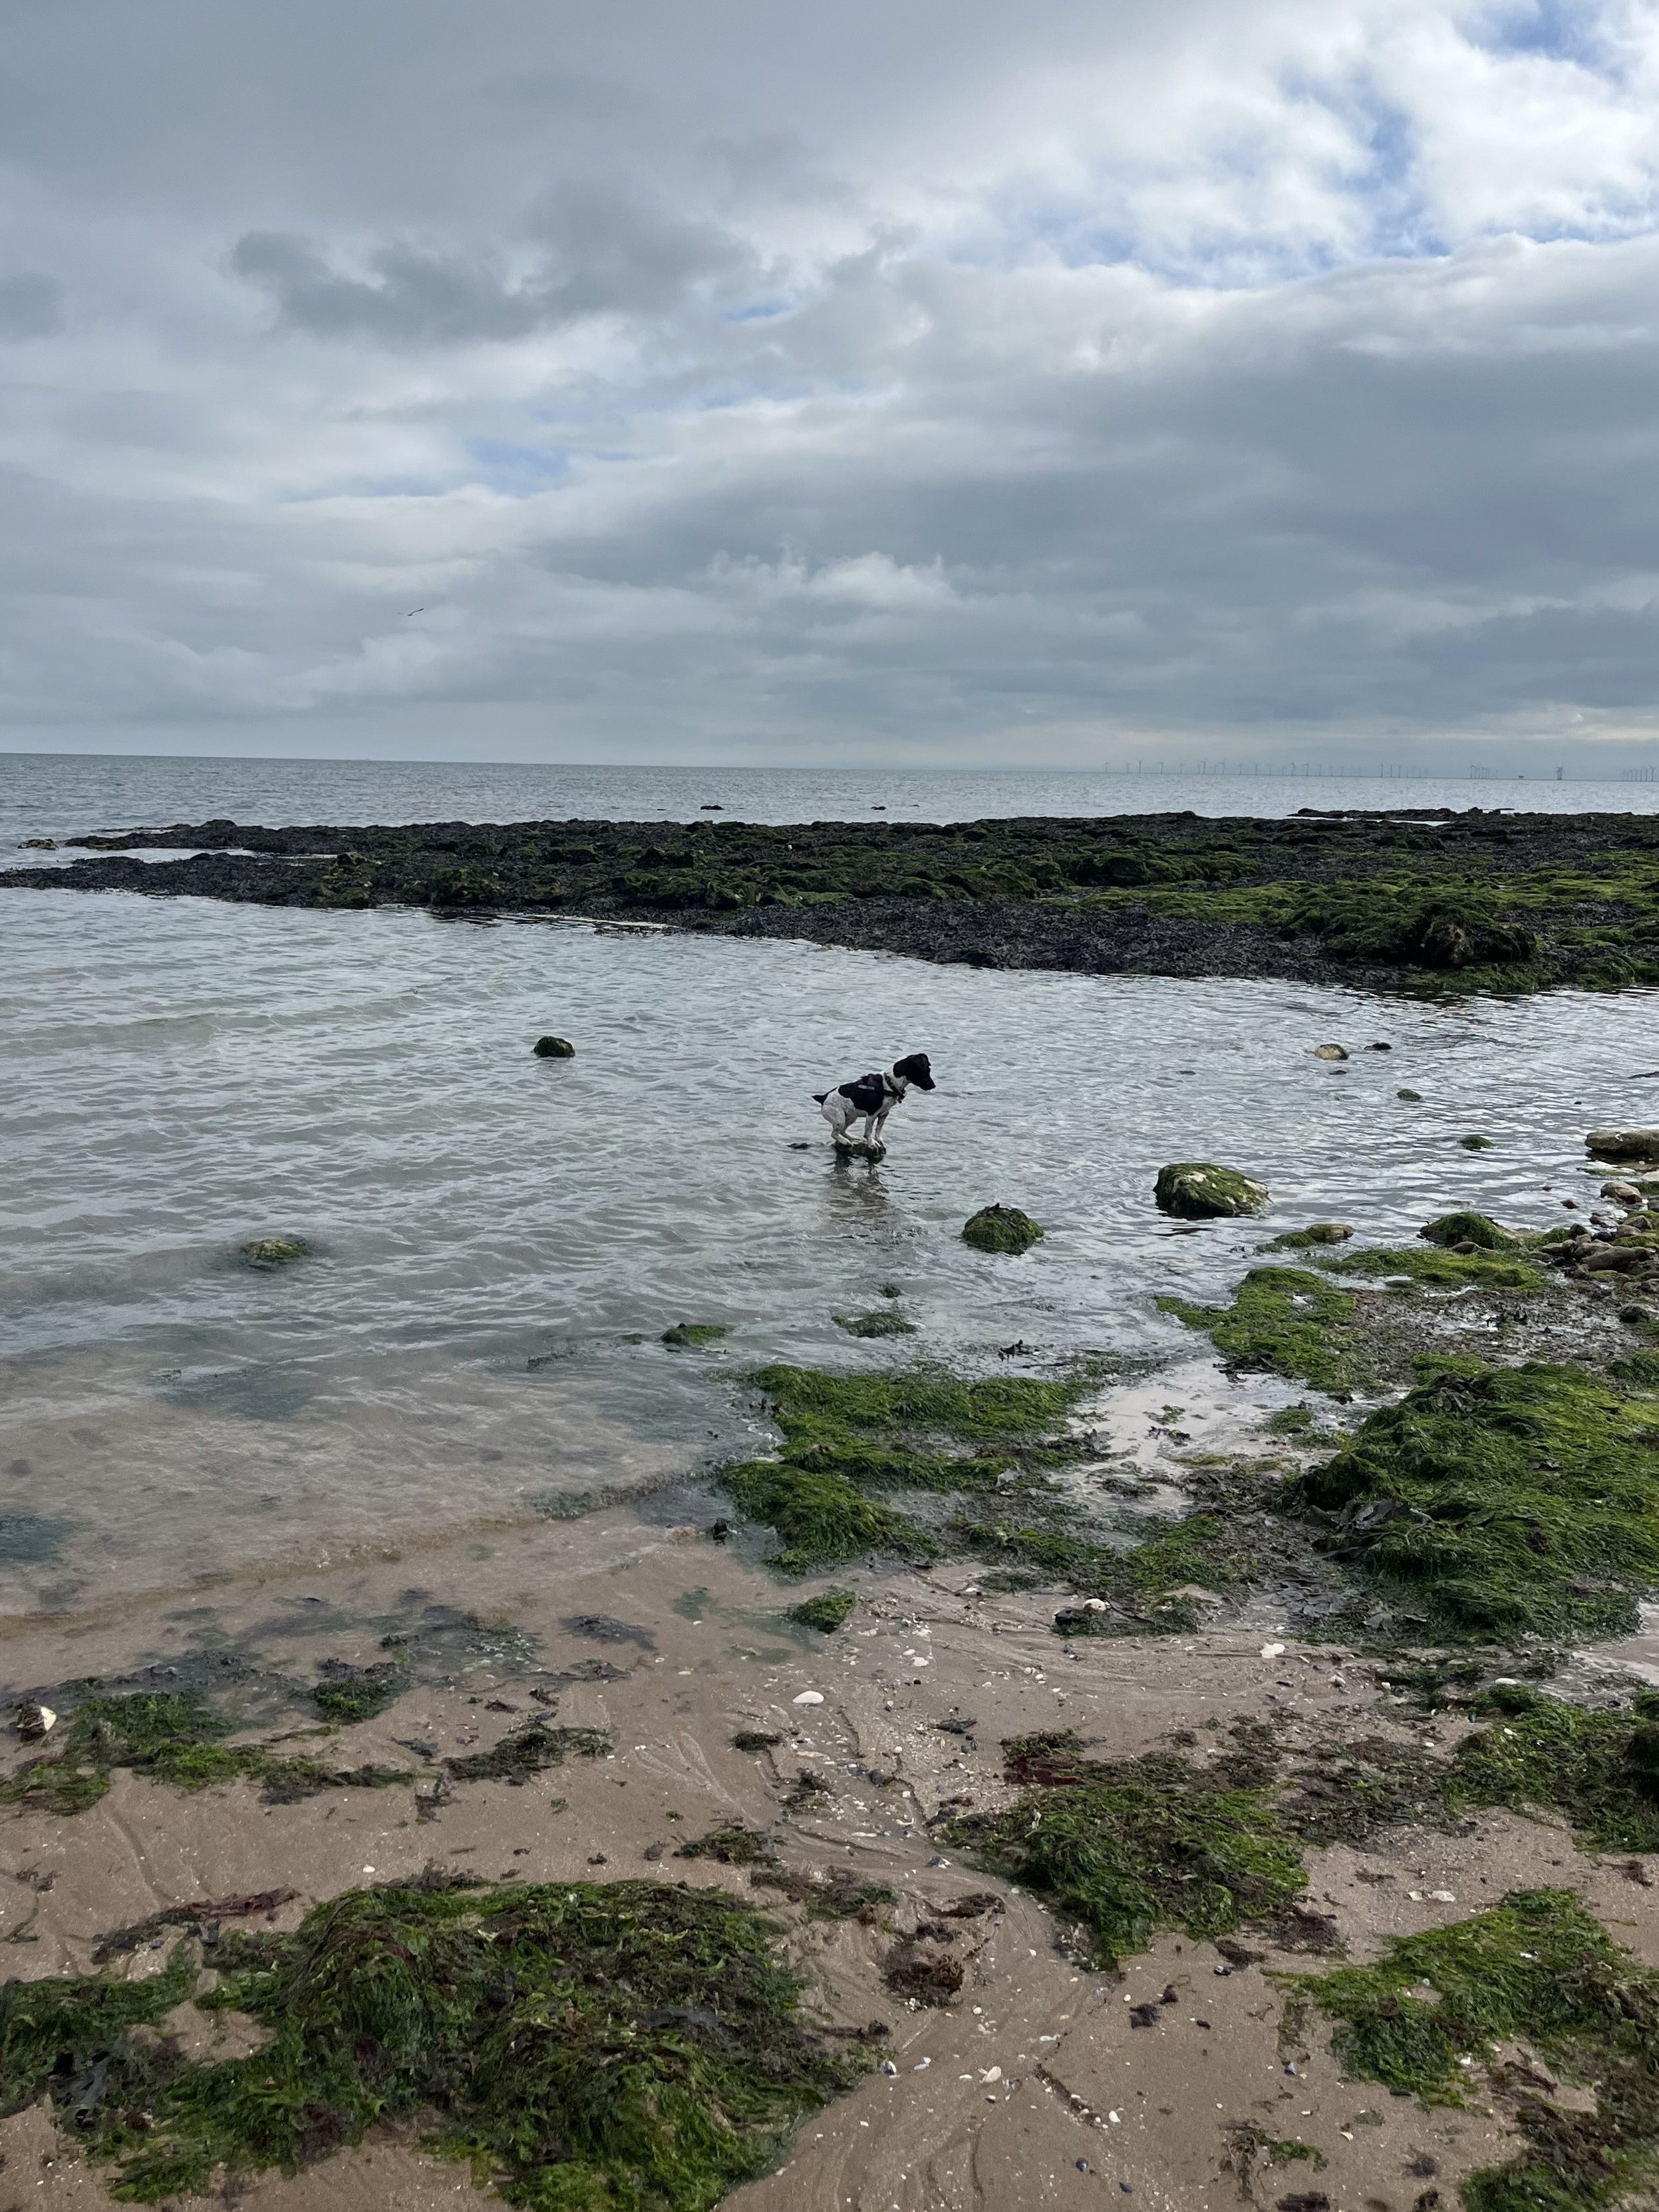 A small terrier, who is a very good girl, standing on a stone in the sea, contemplates a jump to the next stone.